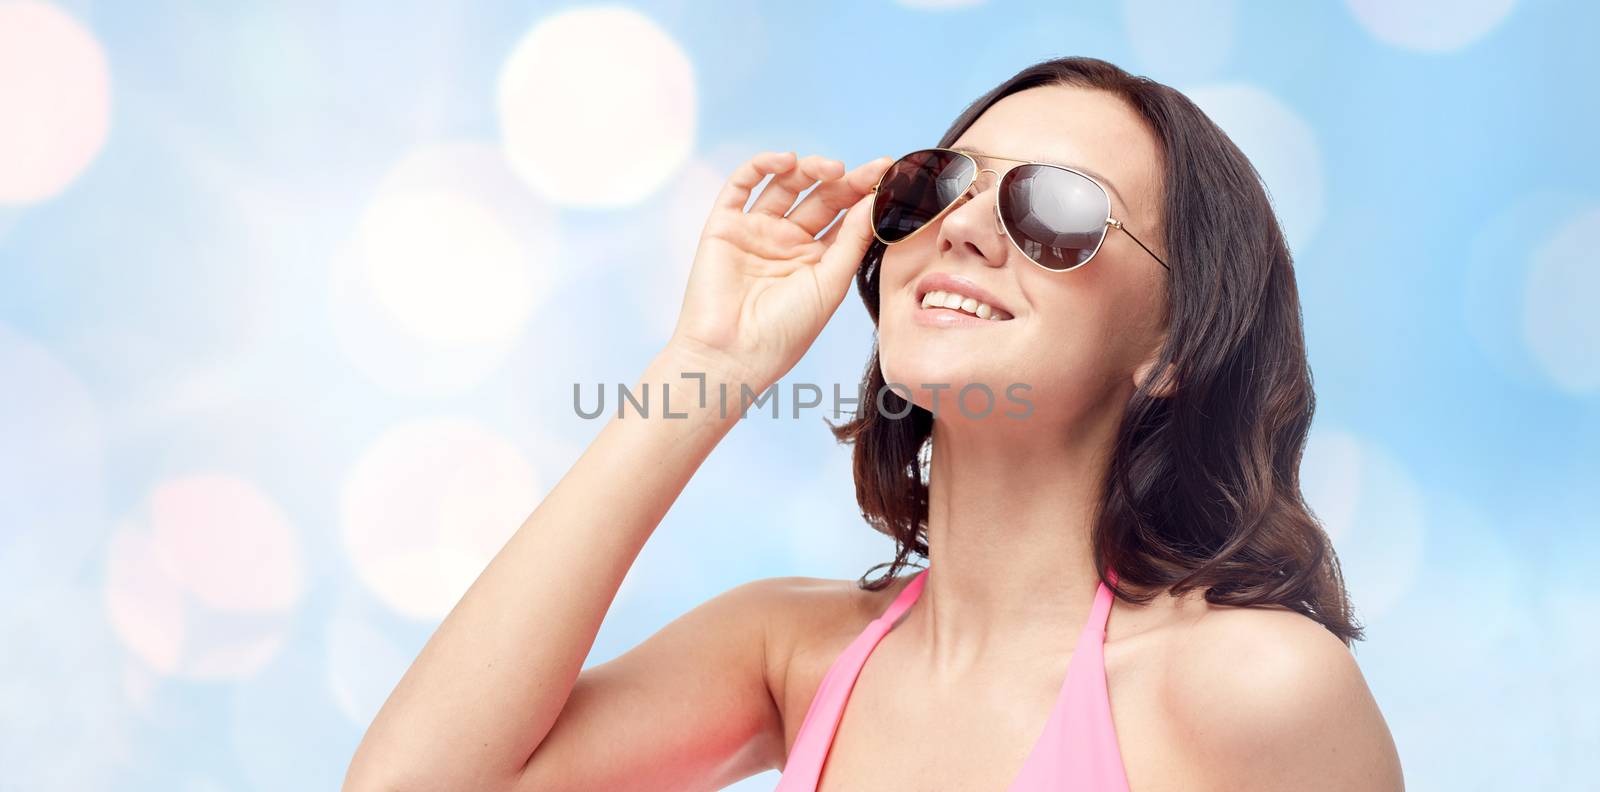 people, fashion, swimwear, summer and beach concept - happy young woman in sunglasses and pink swimsuit looking up over blue holidays lights background